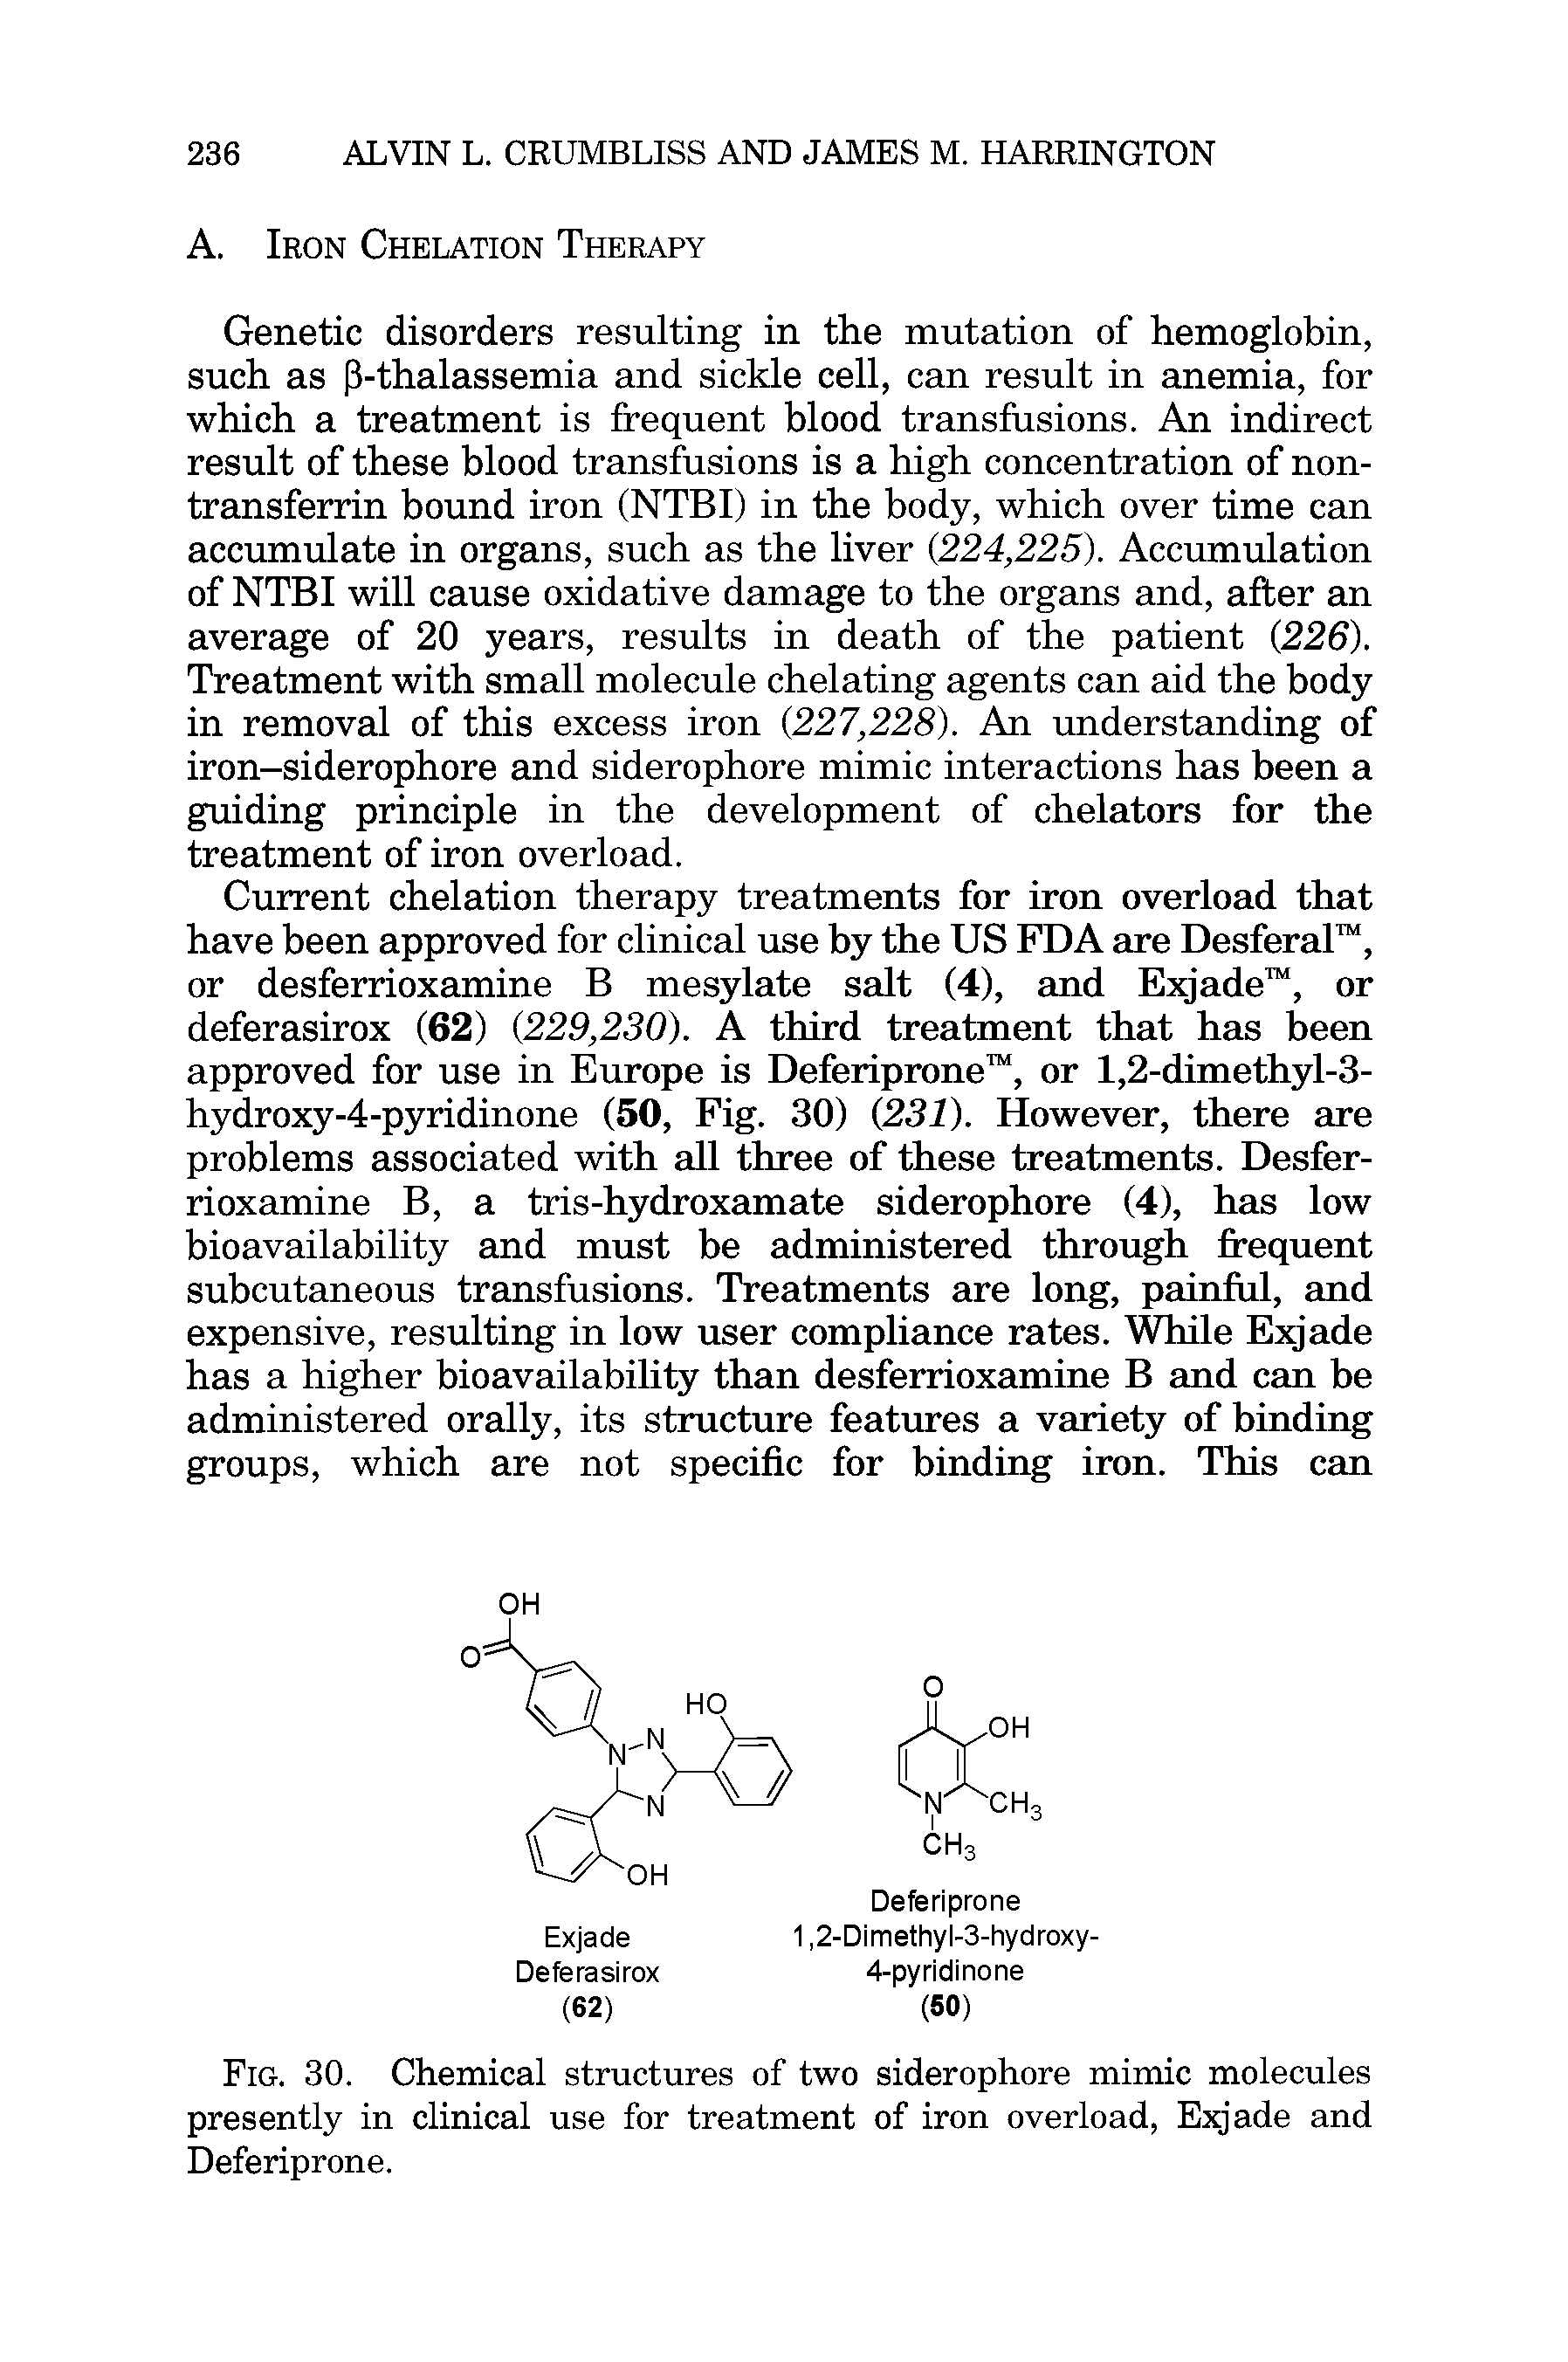 Fig. 30. Chemical structures of two siderophore mimic molecules presently in clinical use for treatment of iron overload, Exjade and Deferiprone.